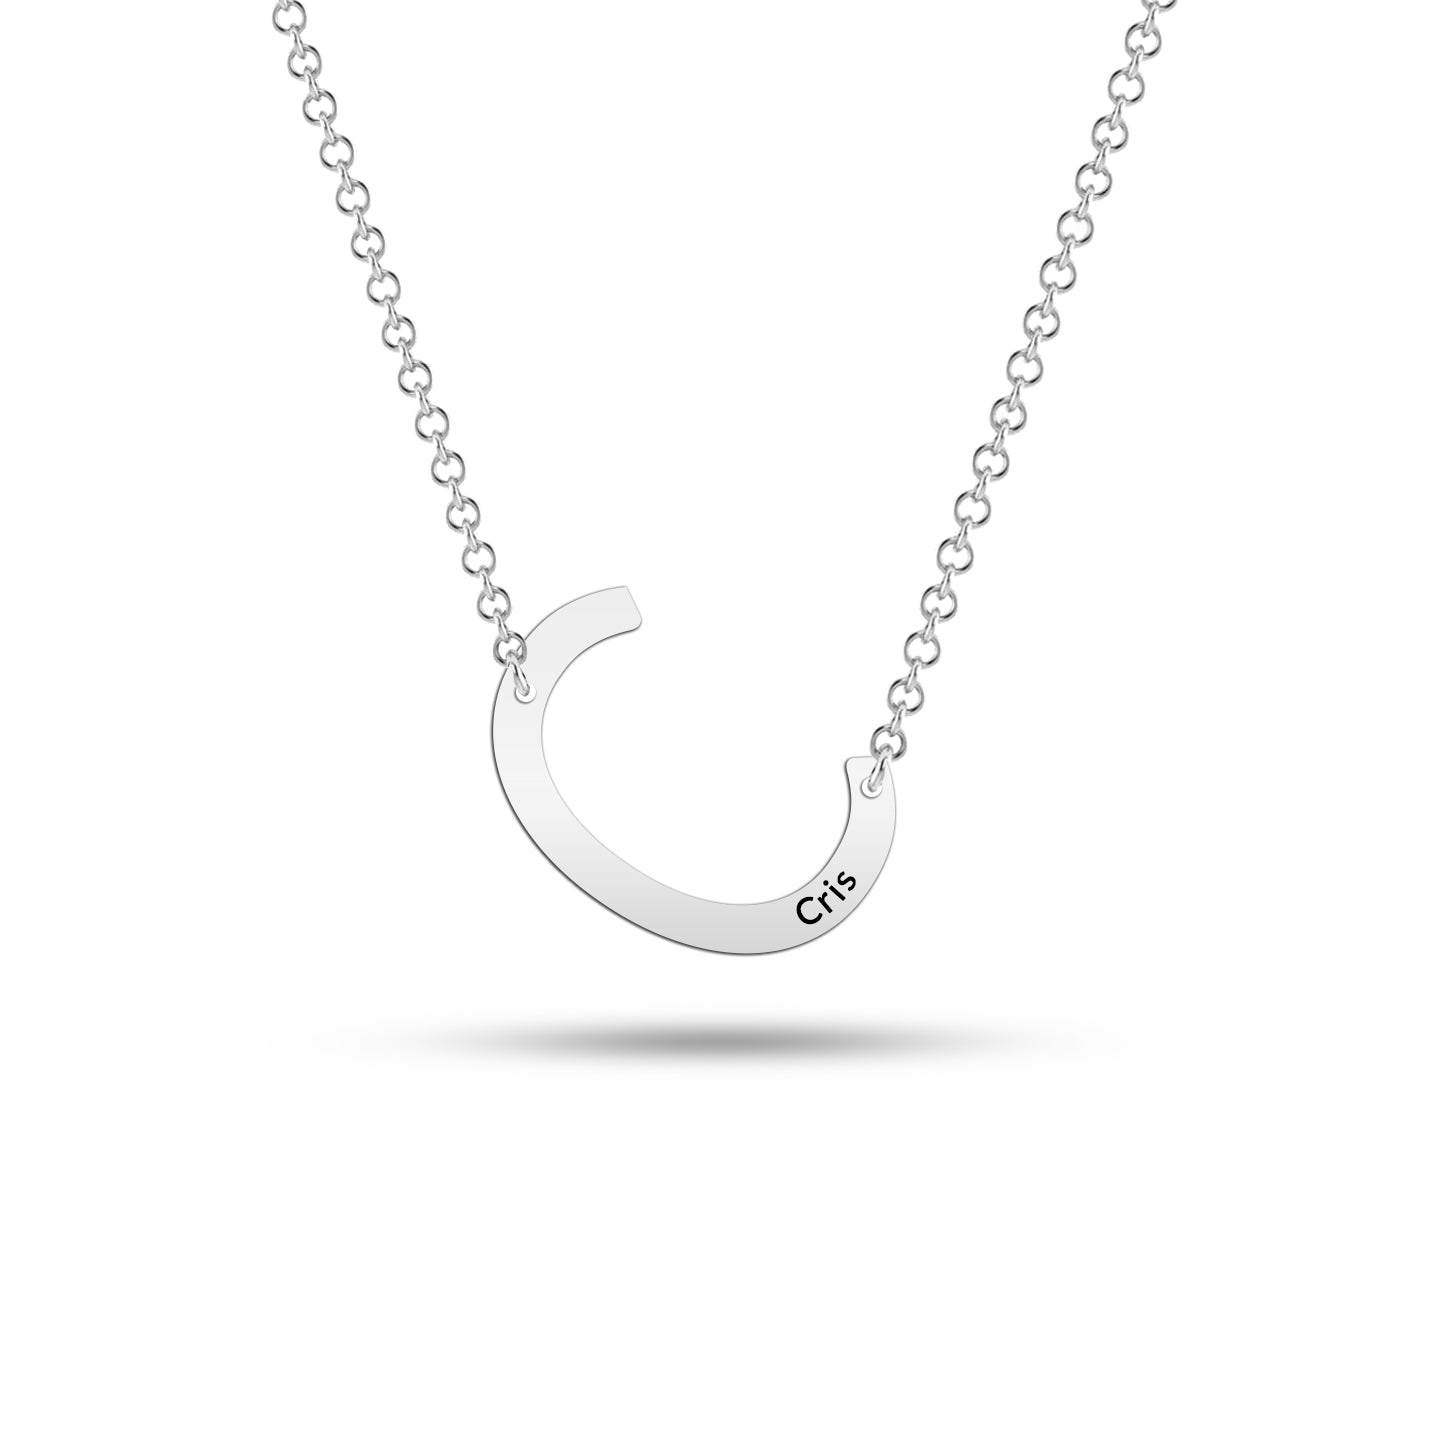 Personalised 925 Sterling Silver Large Initial with Engravable Name Offset Pendant Necklace for Men Women and Teen